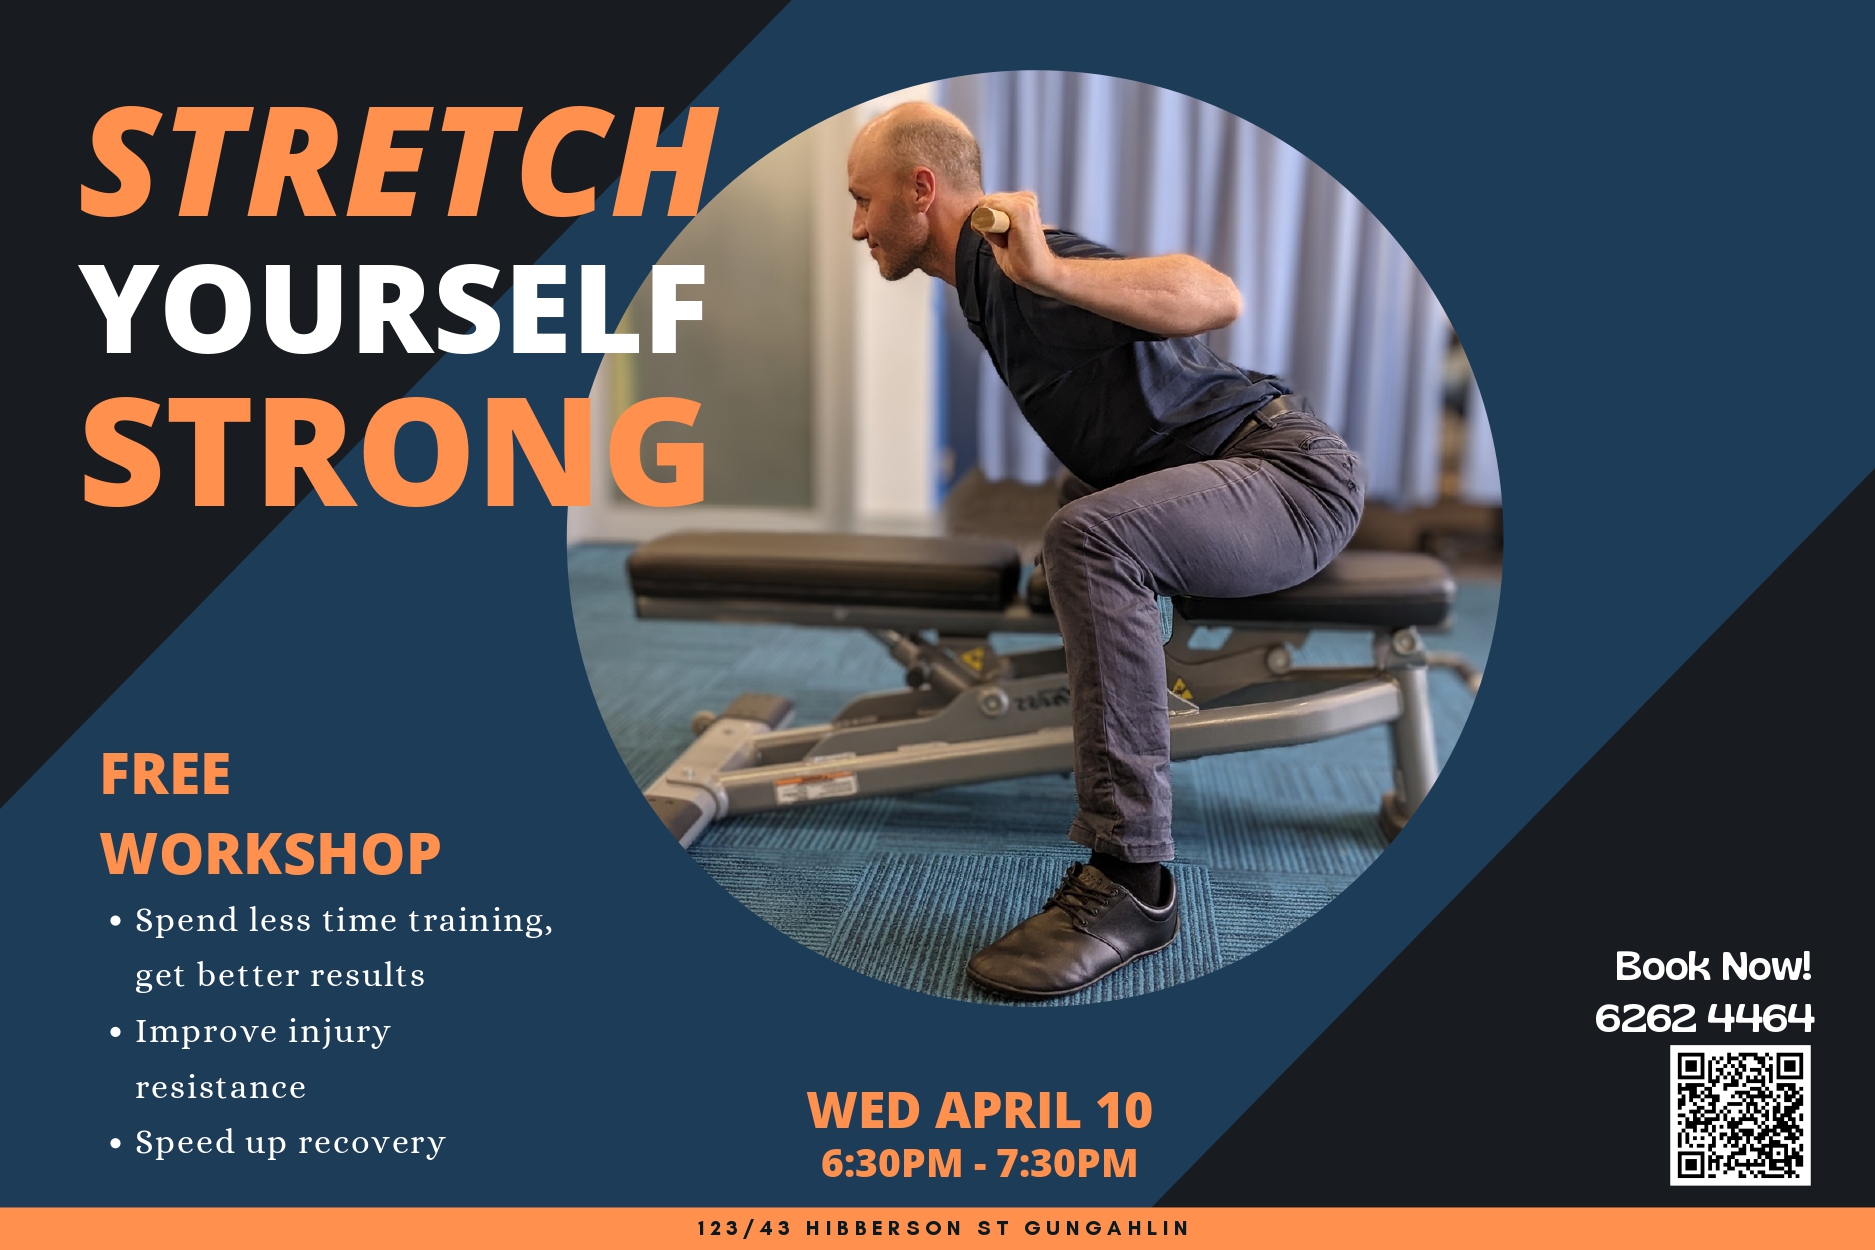 Stretch Yourself Strong Workshop